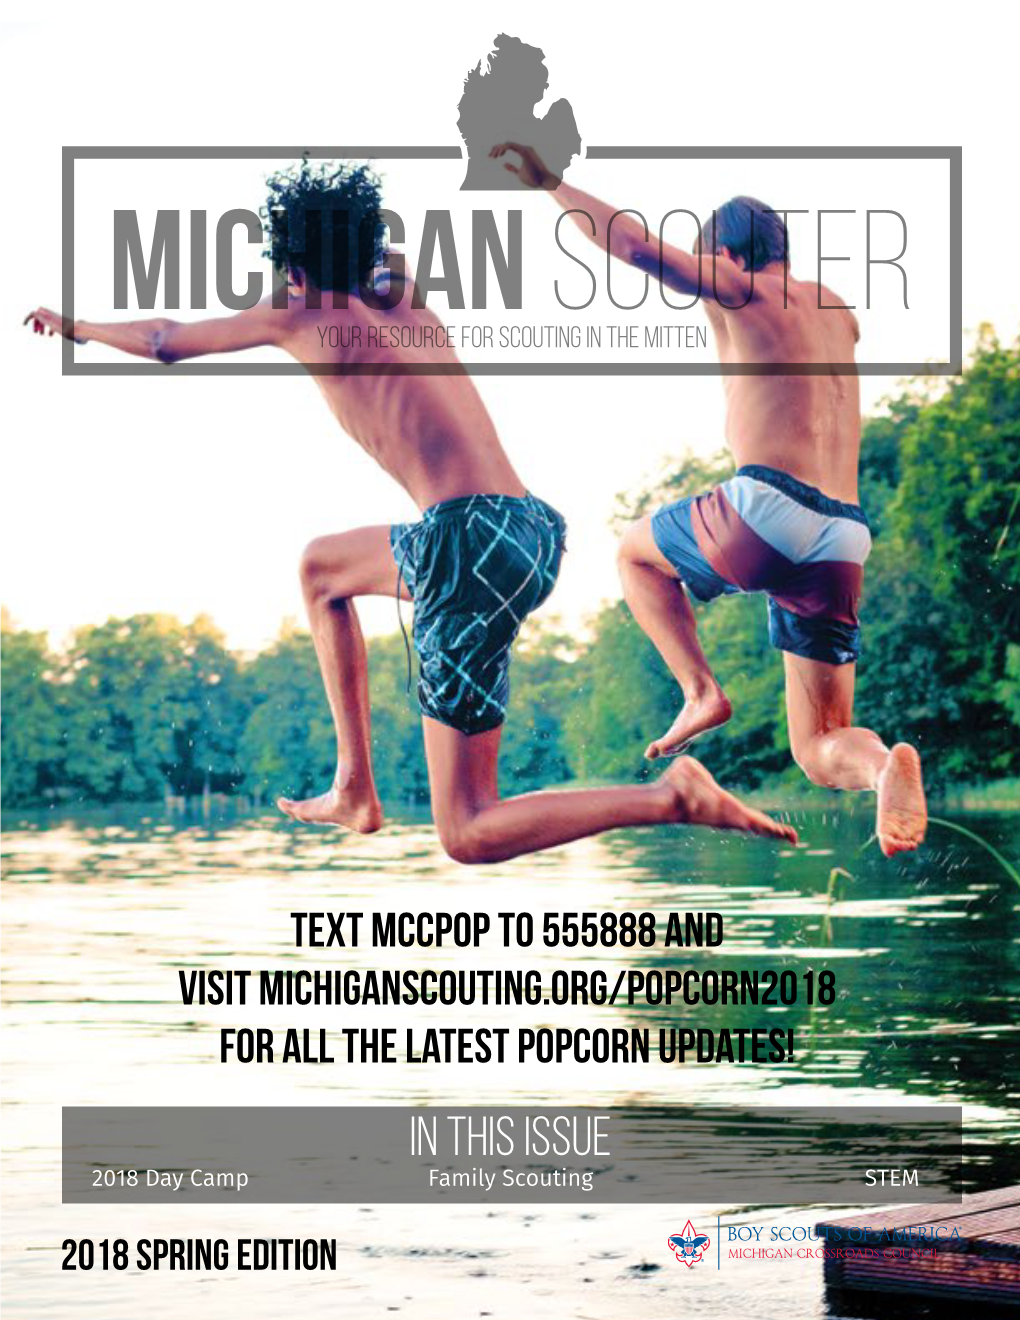 Your Resource for Scouting in the Mitten